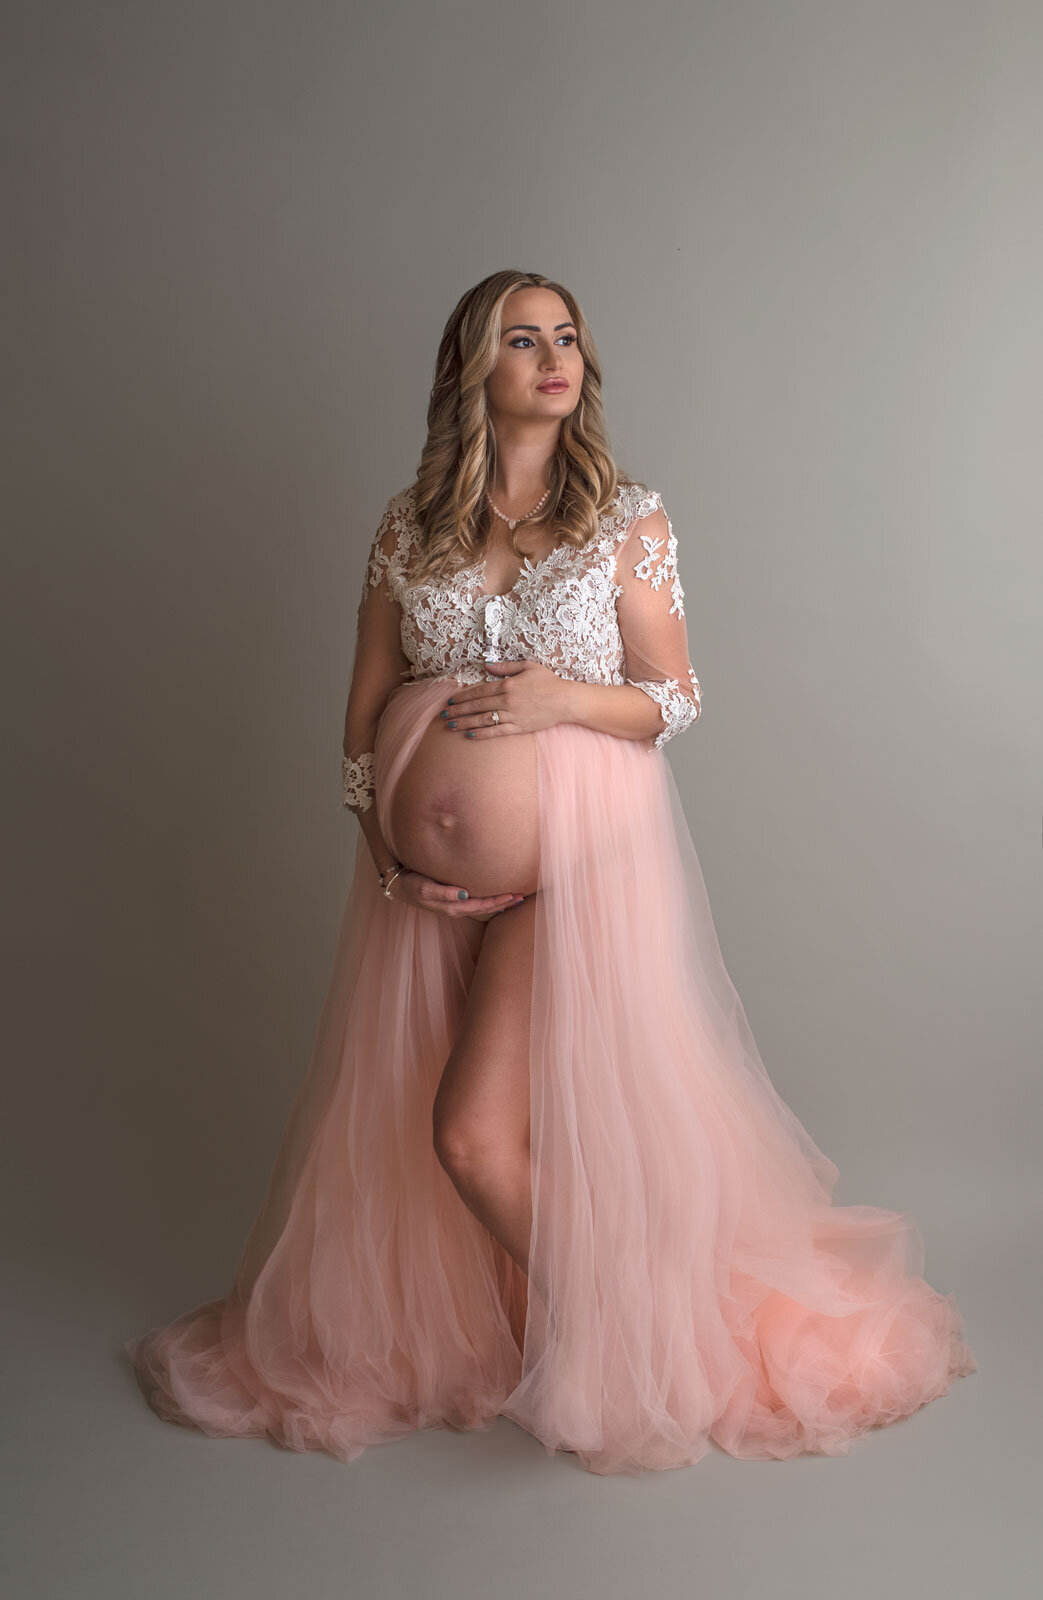 pregnant woman in pink and lace gown